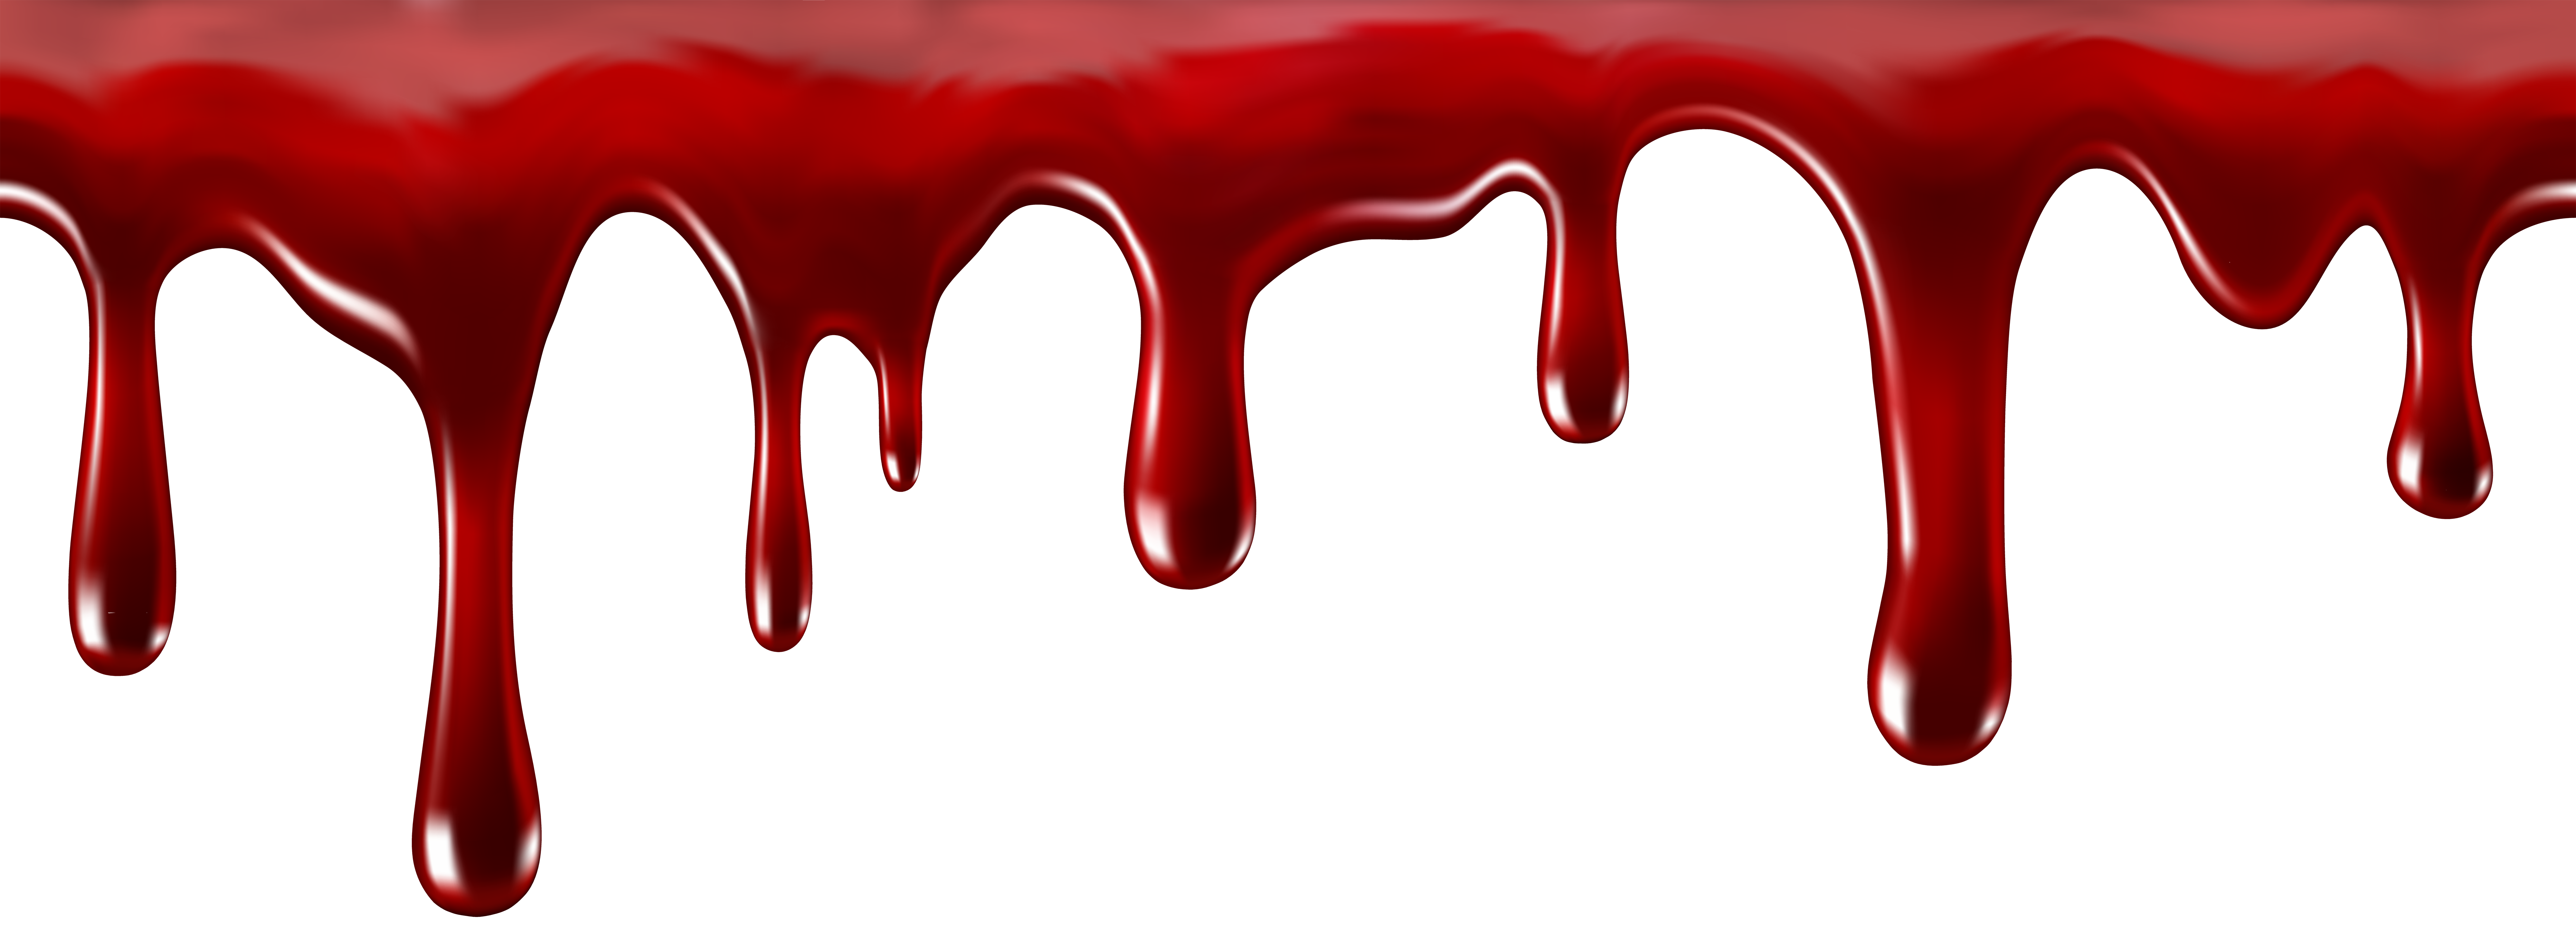 The blood clipart - Clipground